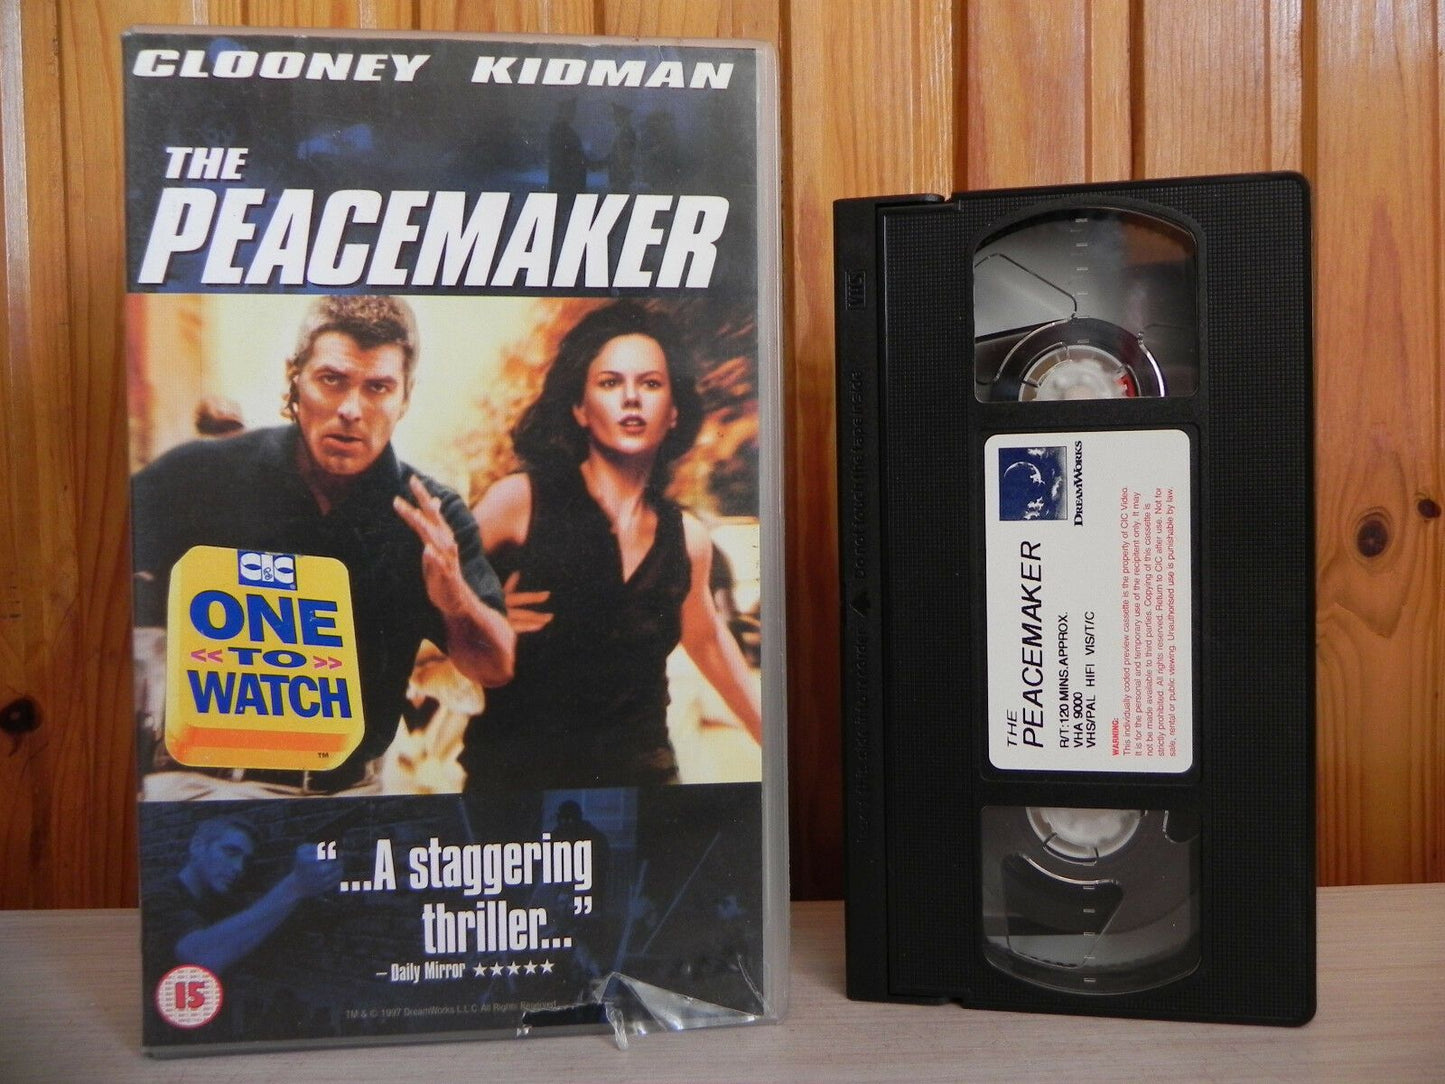 The Peacemaker - Clooney - Crime, Action, Thriller - Sample Copy Video - Pal VHS-